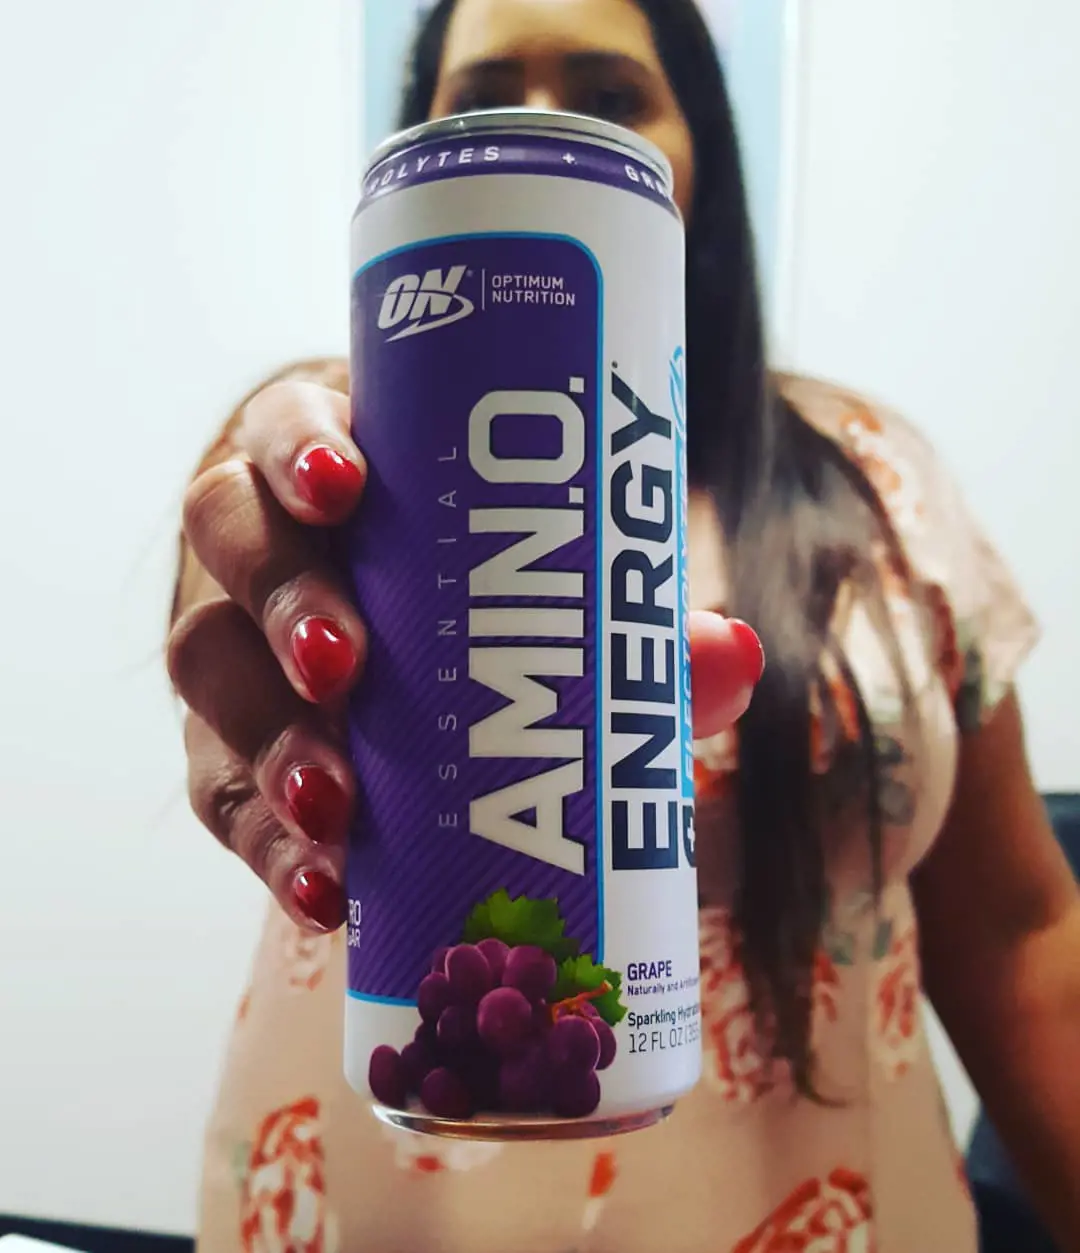 Optimum Nutrition's Amino Energy comes in four different flavors